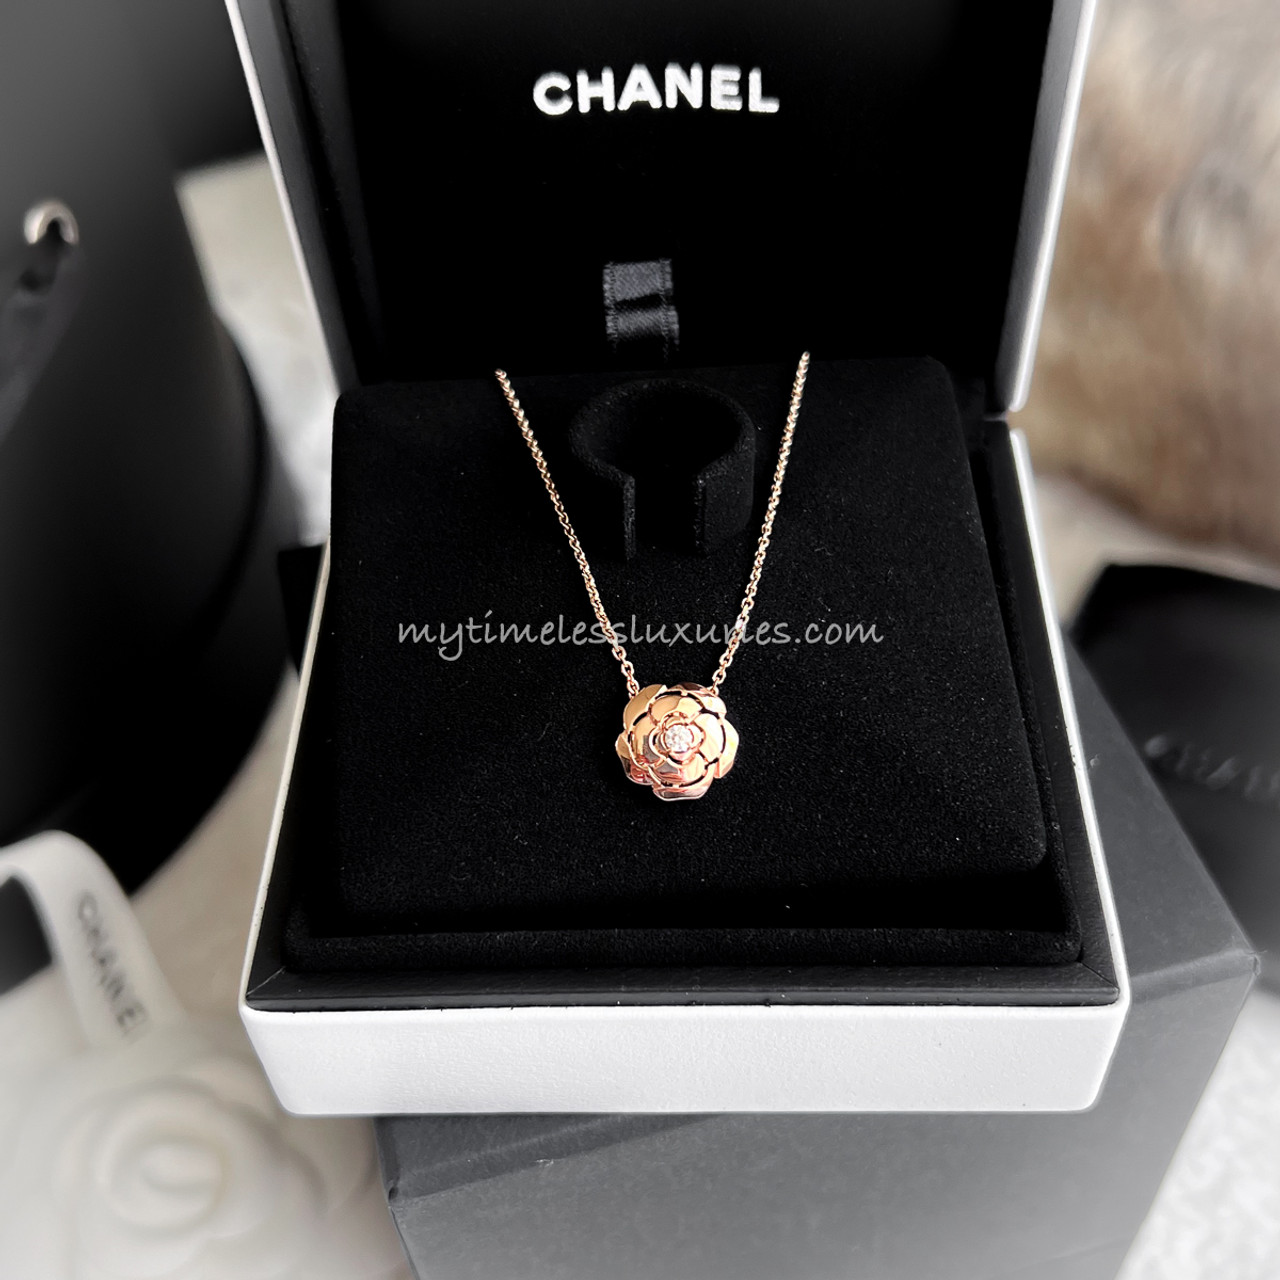 Chanel Double C Pendant Necklace 18K Rose Gold With Diamonds